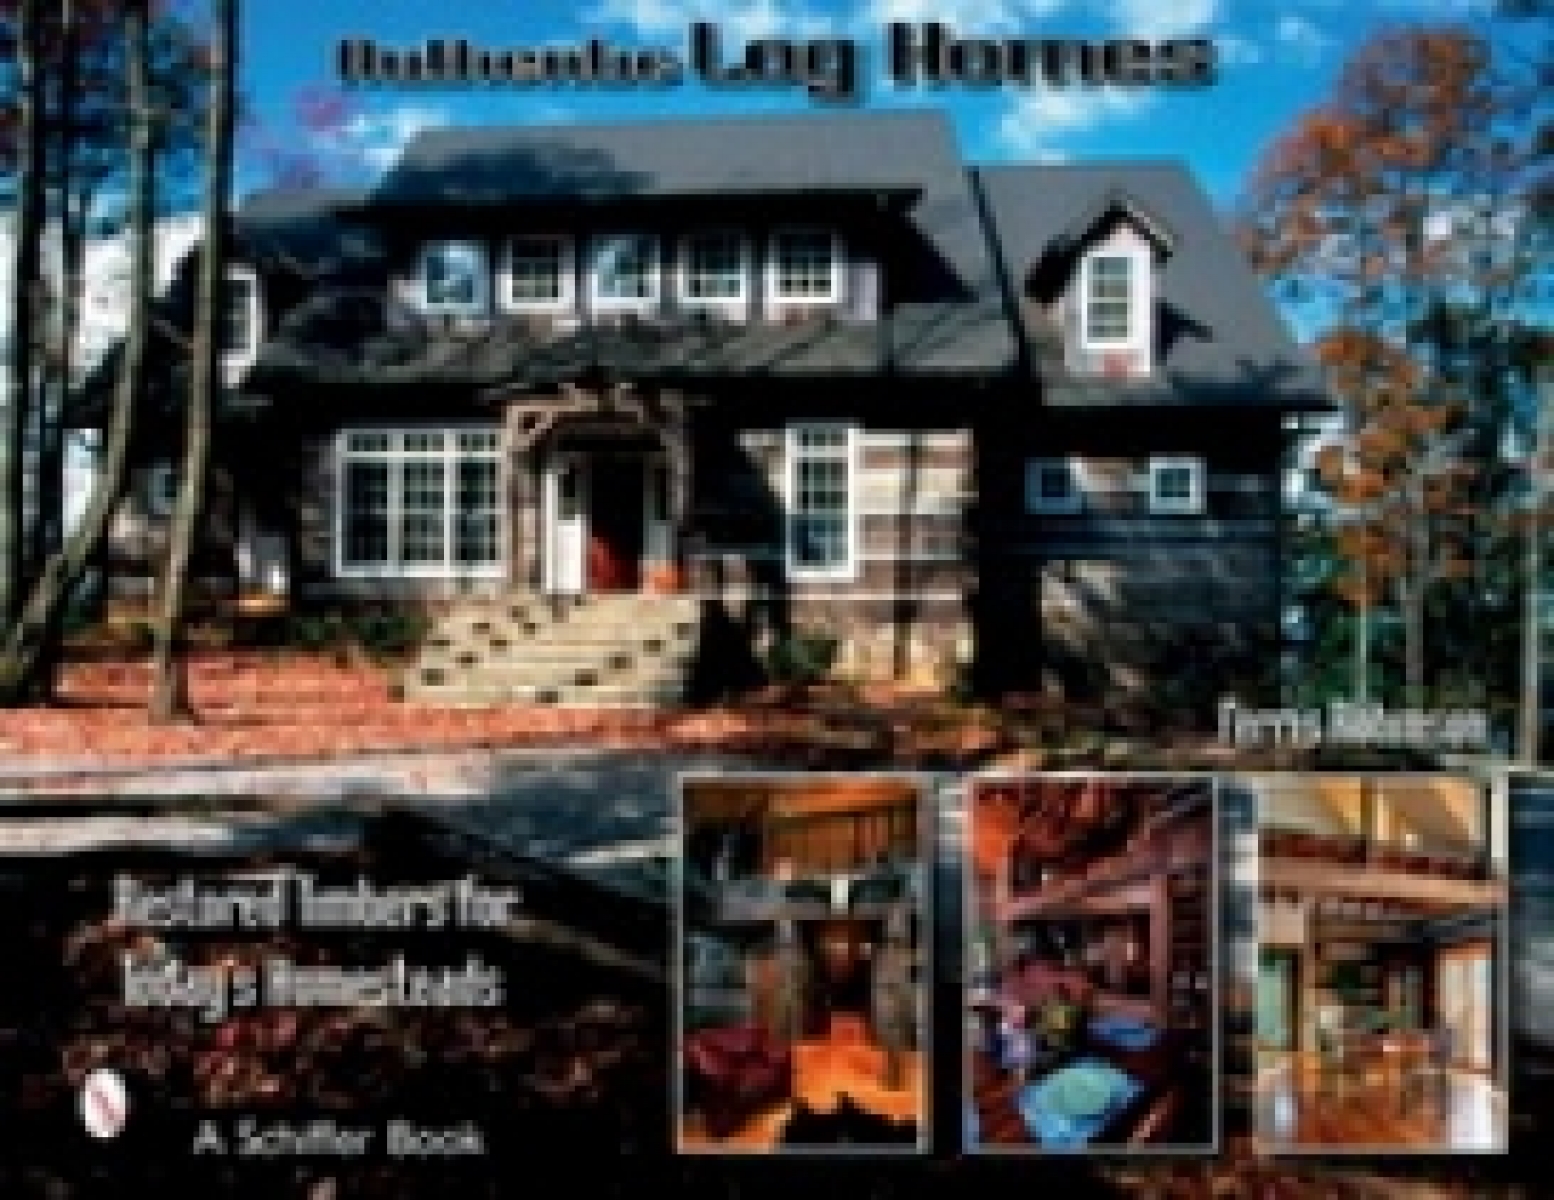 Ferris R. Authentic Log Homes: Restored Timbers for Today's Homesteads 